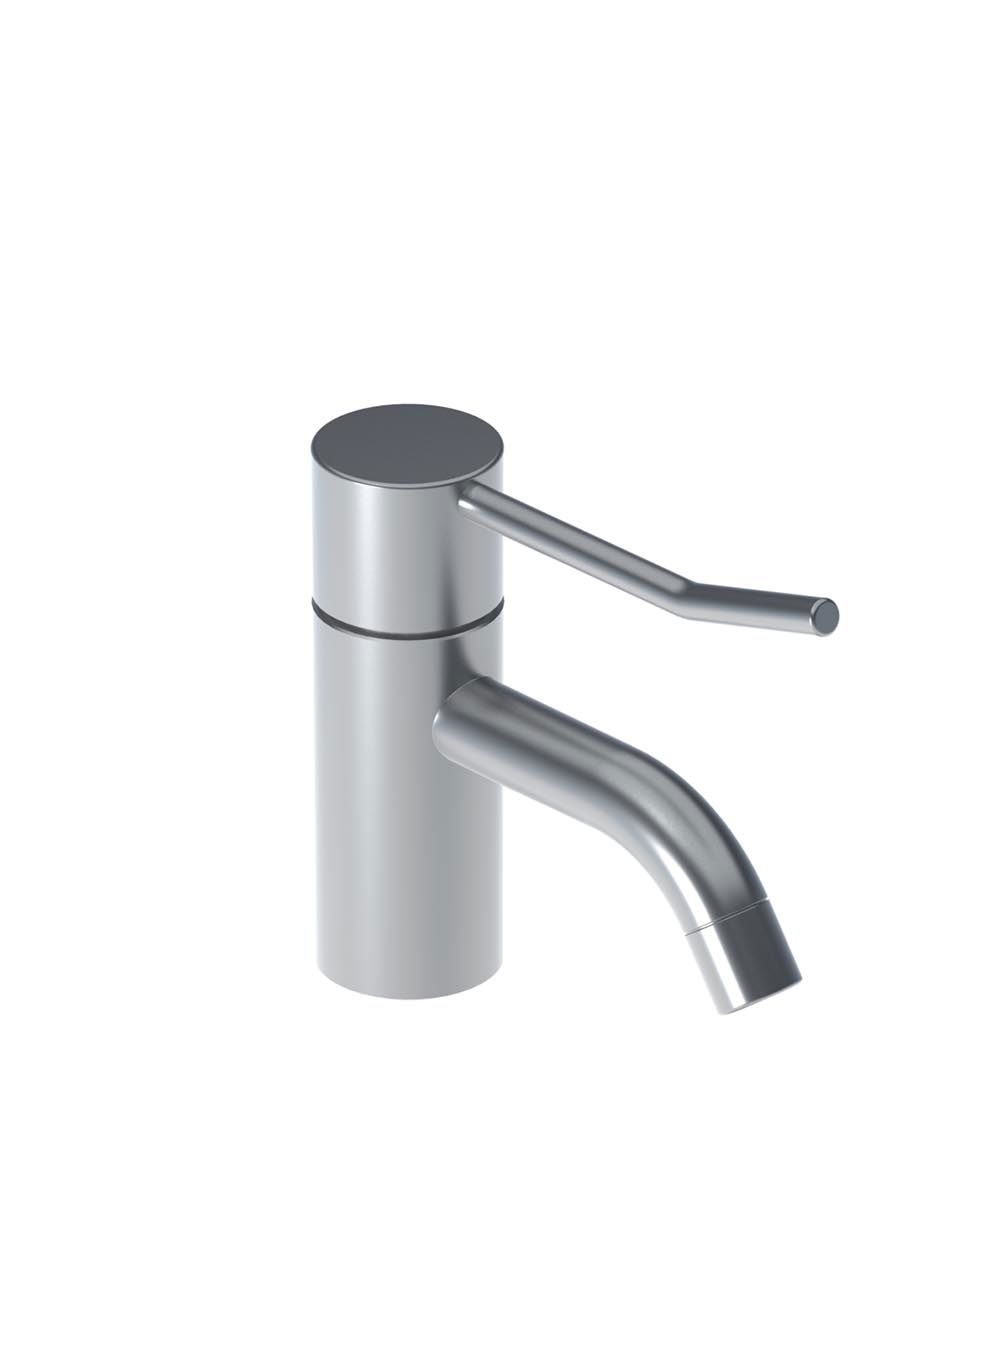 RB1L: Pillar tap with ¼ turn ceramic disc technology, with long lever, fixed spout, water saving aerator. 